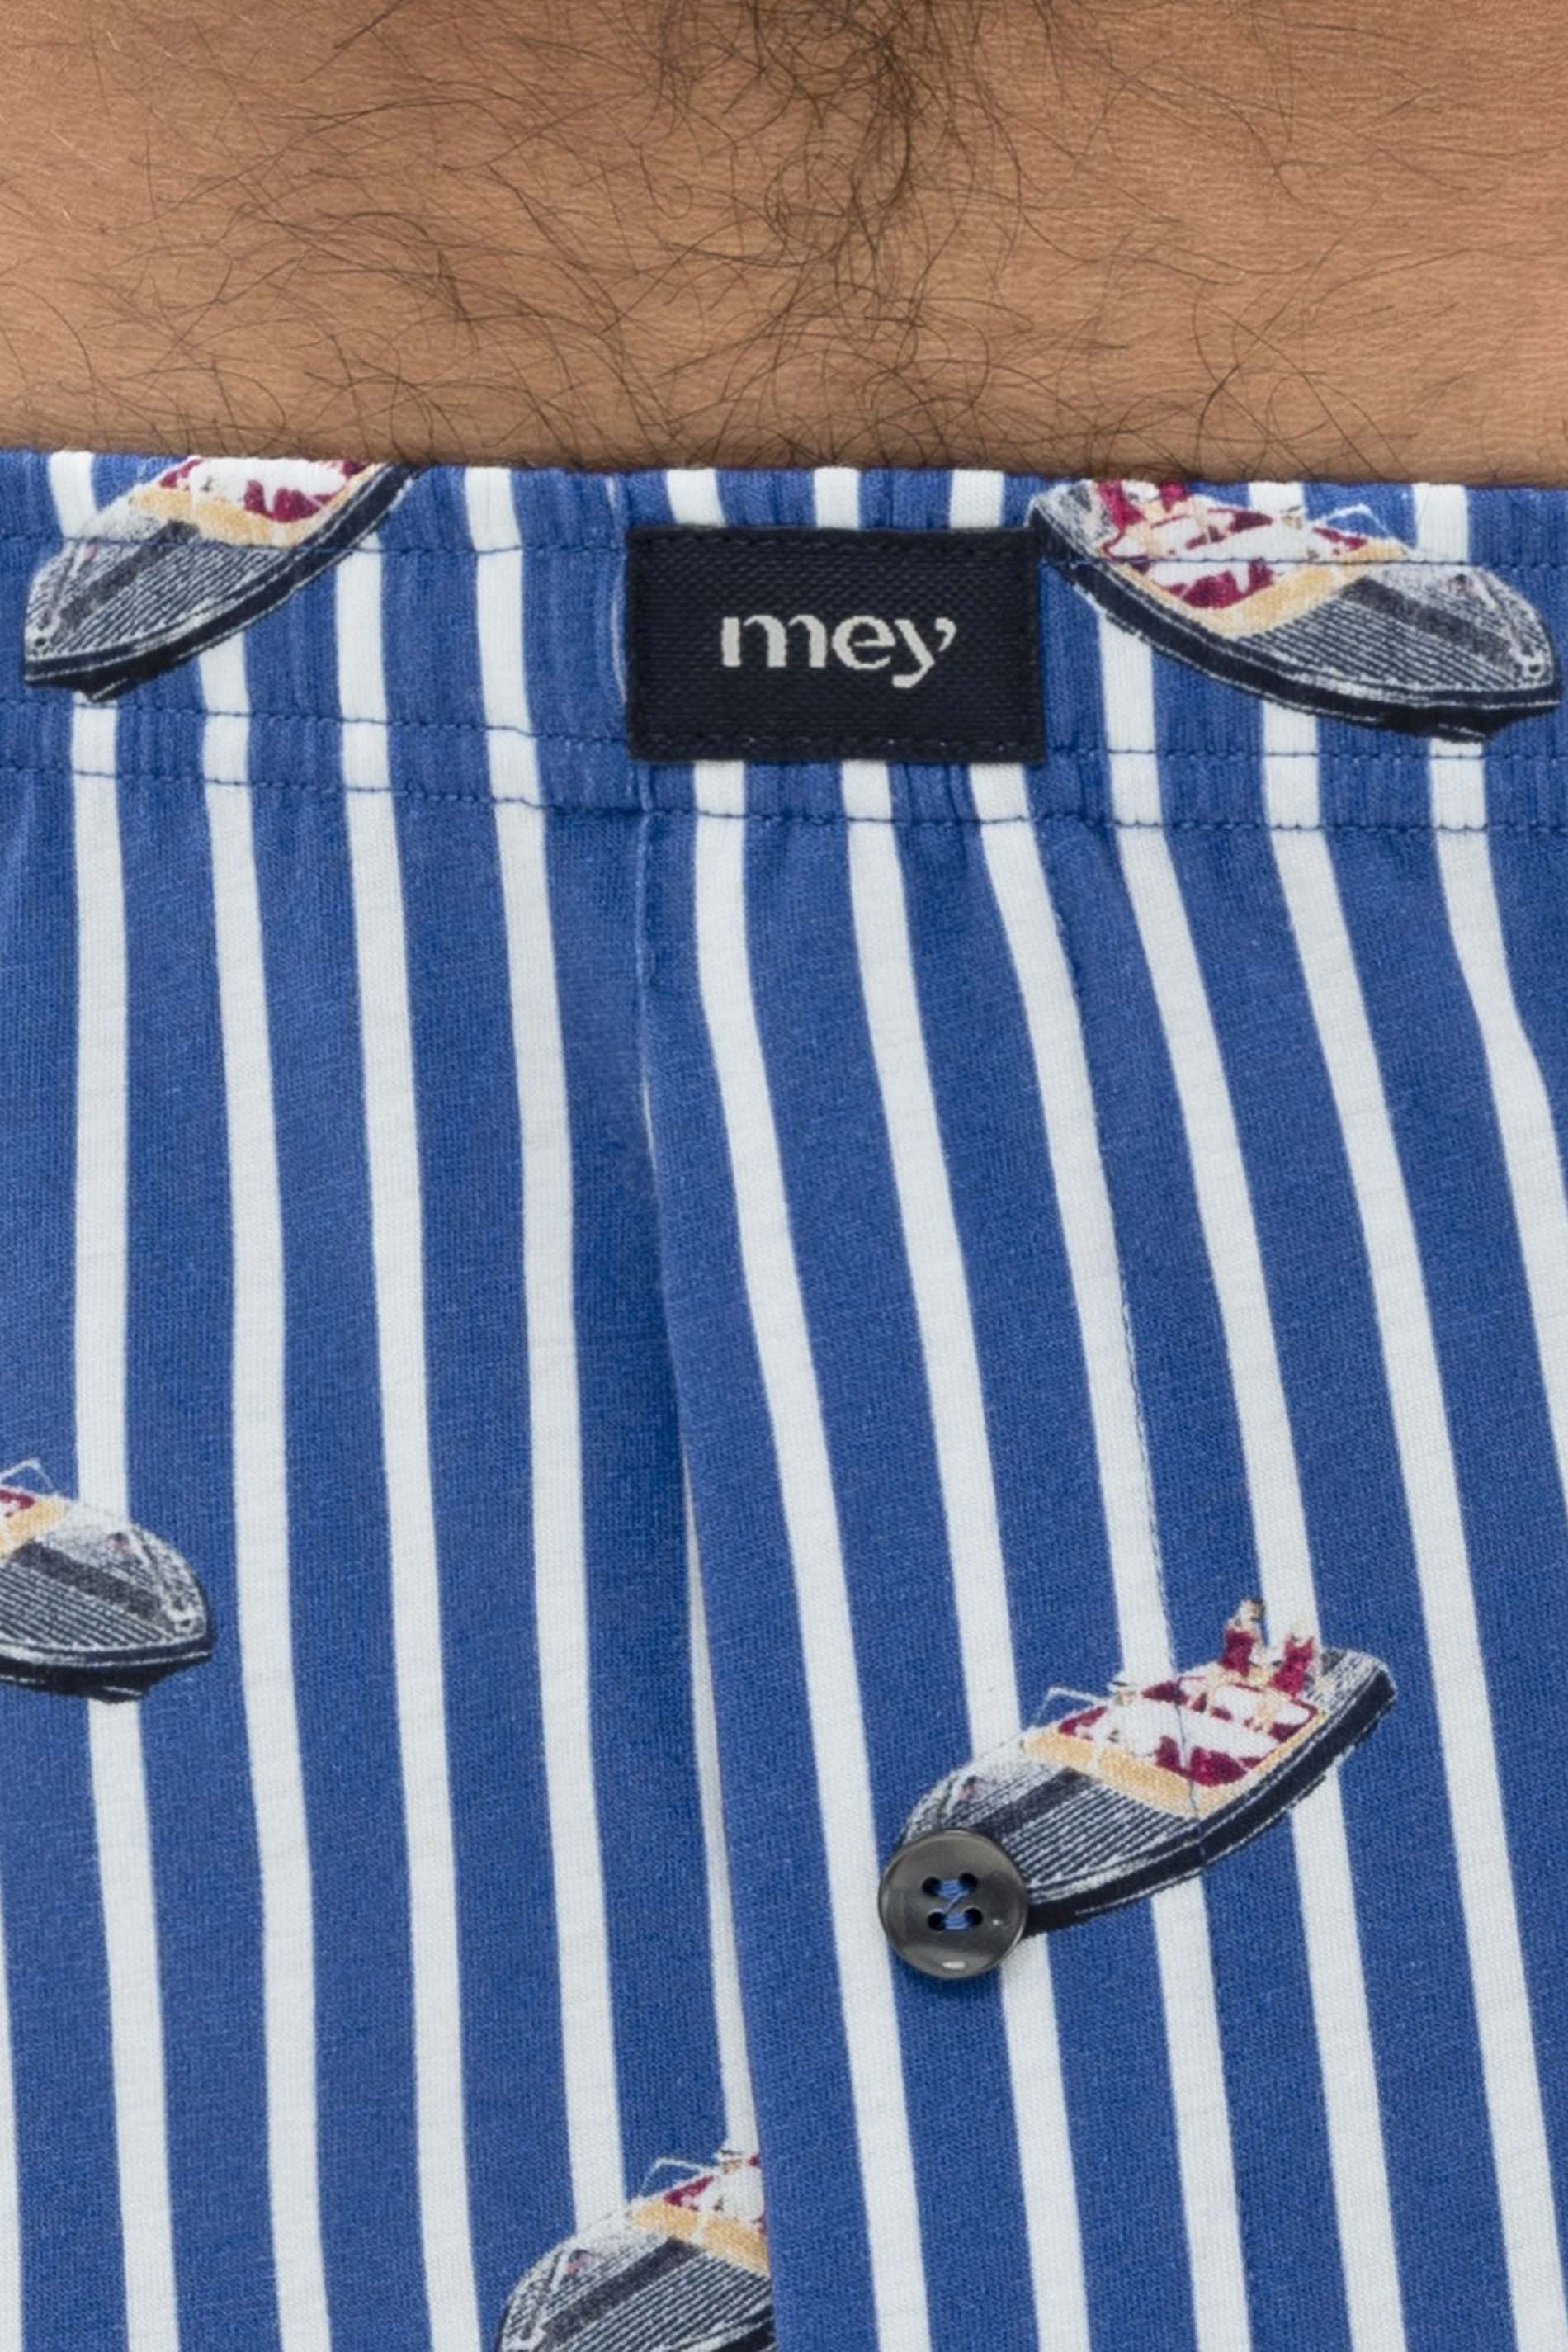 Boxer shorts Serie Boats Detail View 01 | mey®